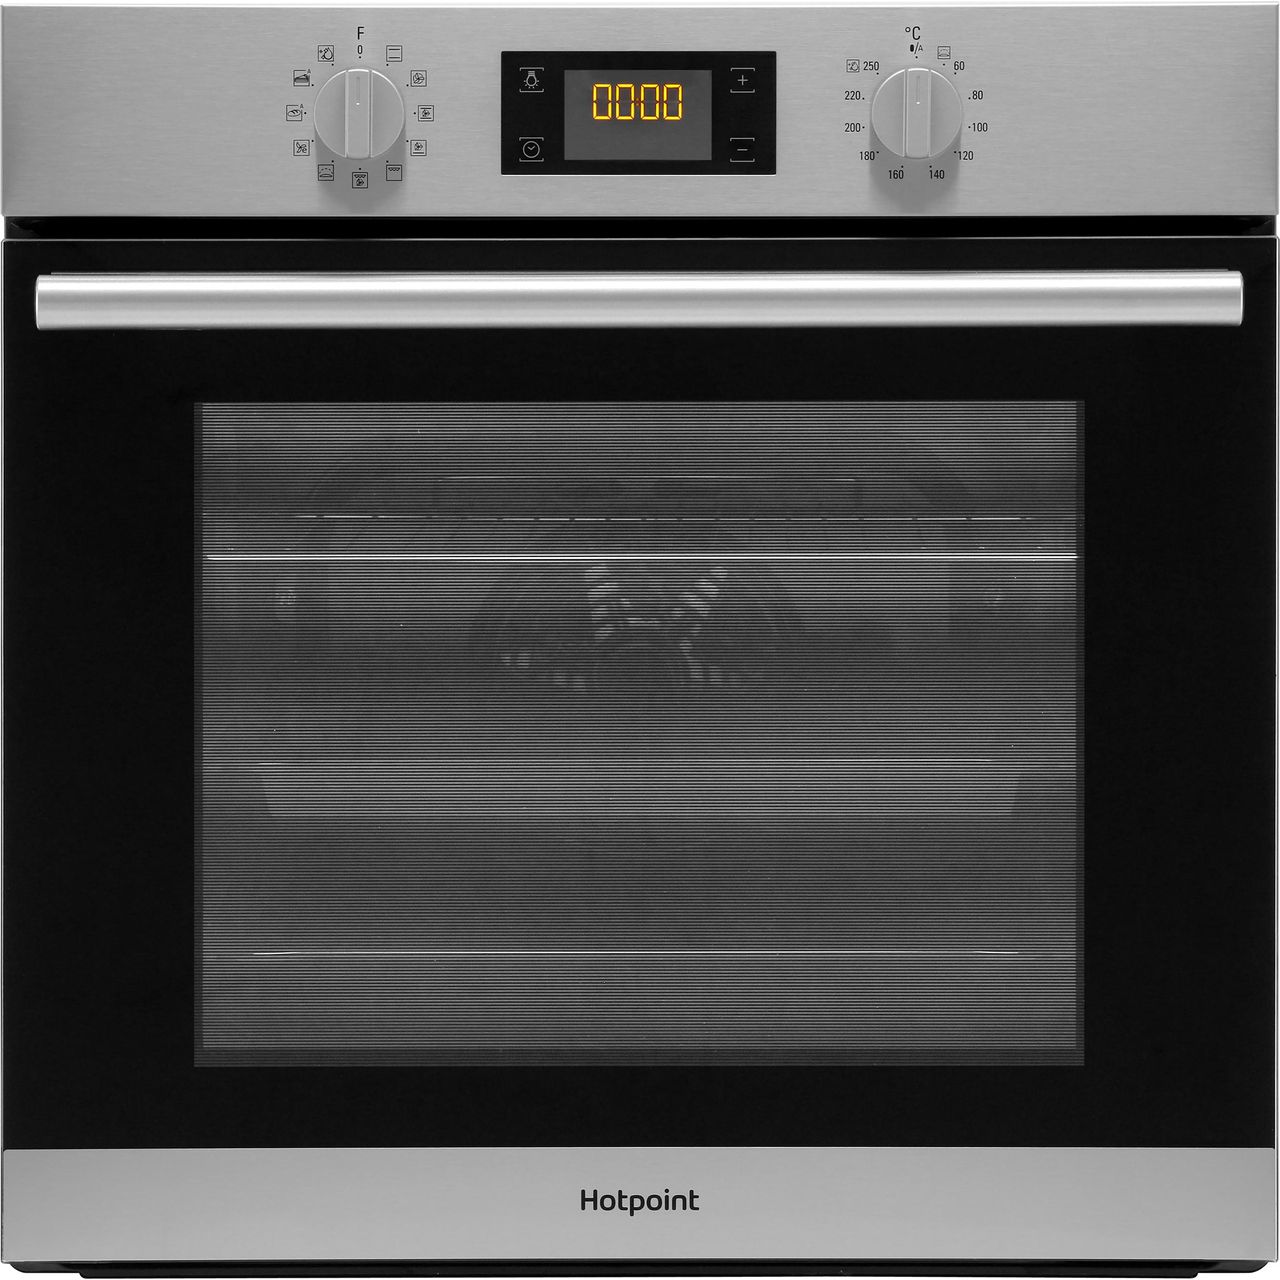 Hotpoint K002930 Built In Electric Single Oven and Ceramic Hob Pack specs